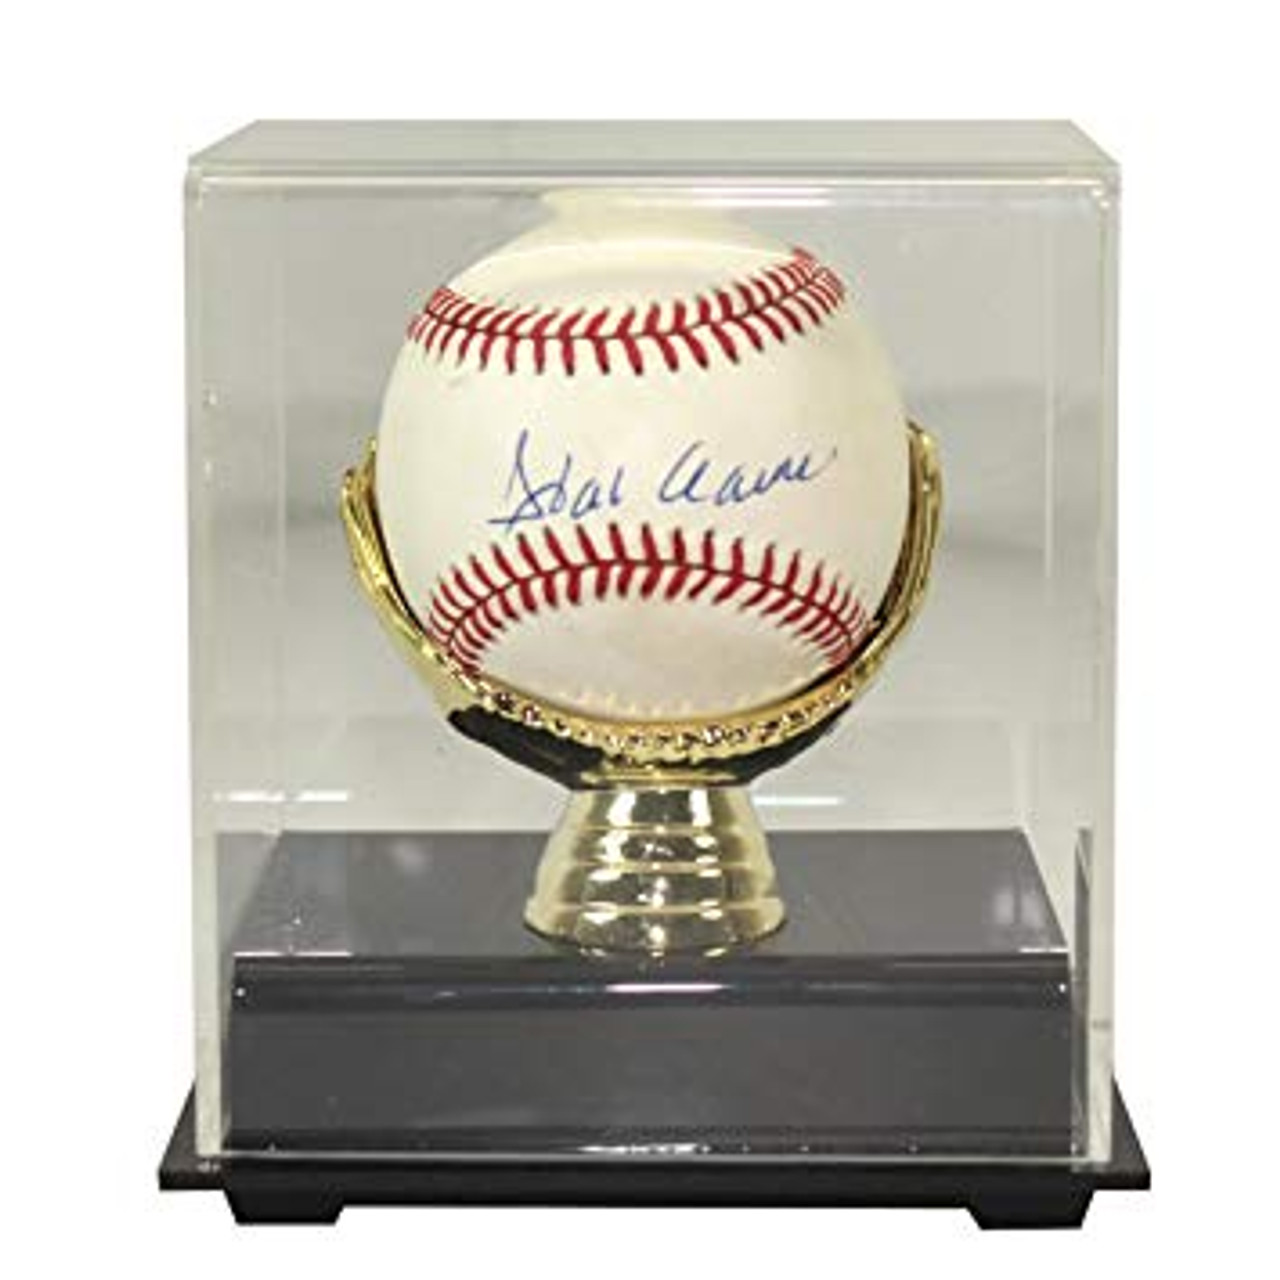 Hank Aaron Signed Rawlings The Gold Glove Co. Baseball Glove (Steiner  Hologram)